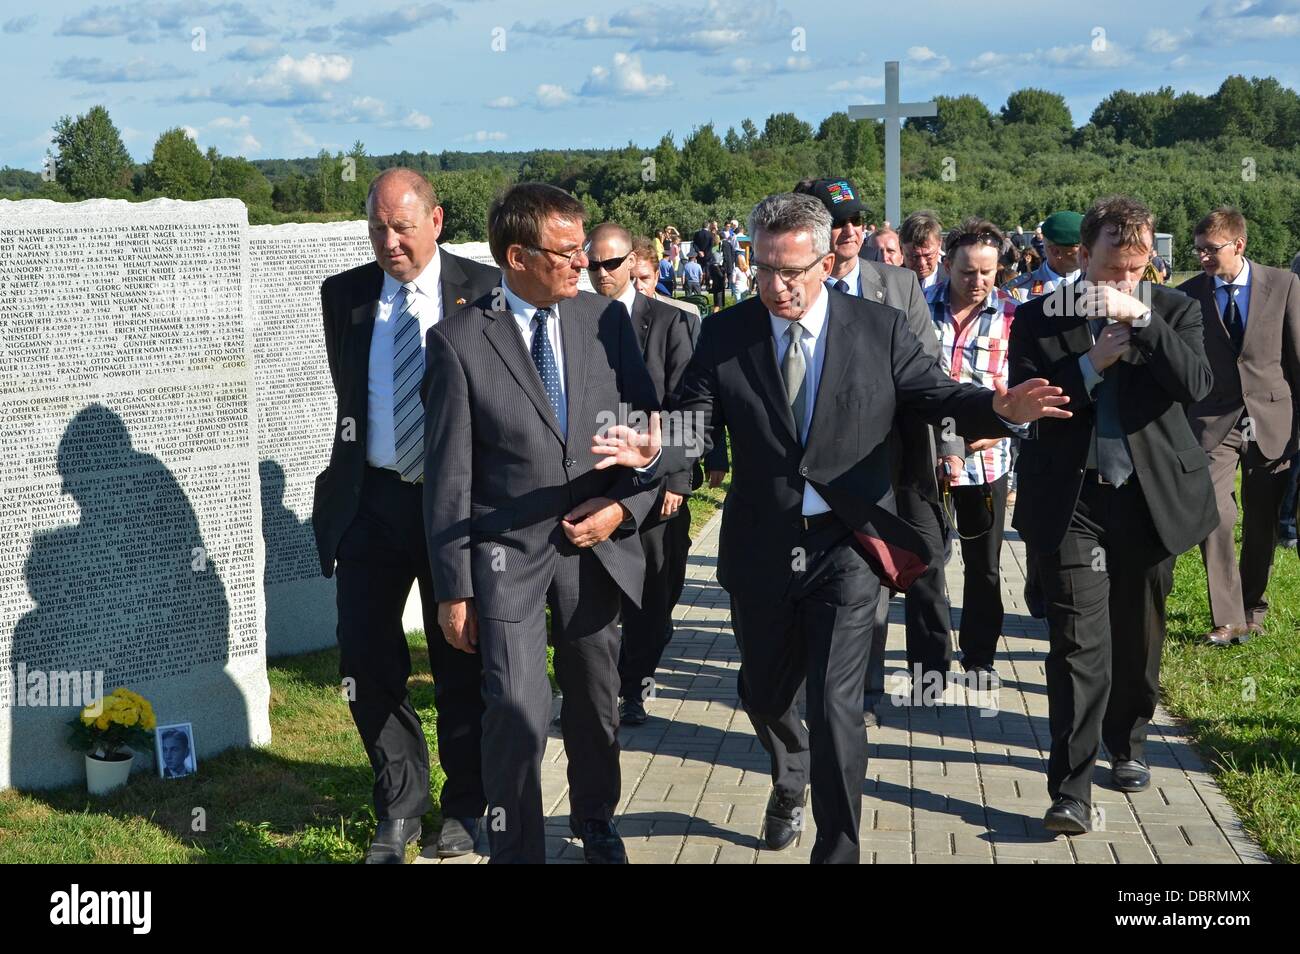 Reinhard Fuehrer (L), President of the German War Graves Commission, and Defence Minister Thomas de Maiziere tour the German military cemetery in Dukhovshchina, Smolensk Oblast, Russia, 03 August 2013. The cemetery is the last resting place for 70,000 German soldiers who died in Russia during World War II. Photo: UWE ZUCCHI Stock Photo